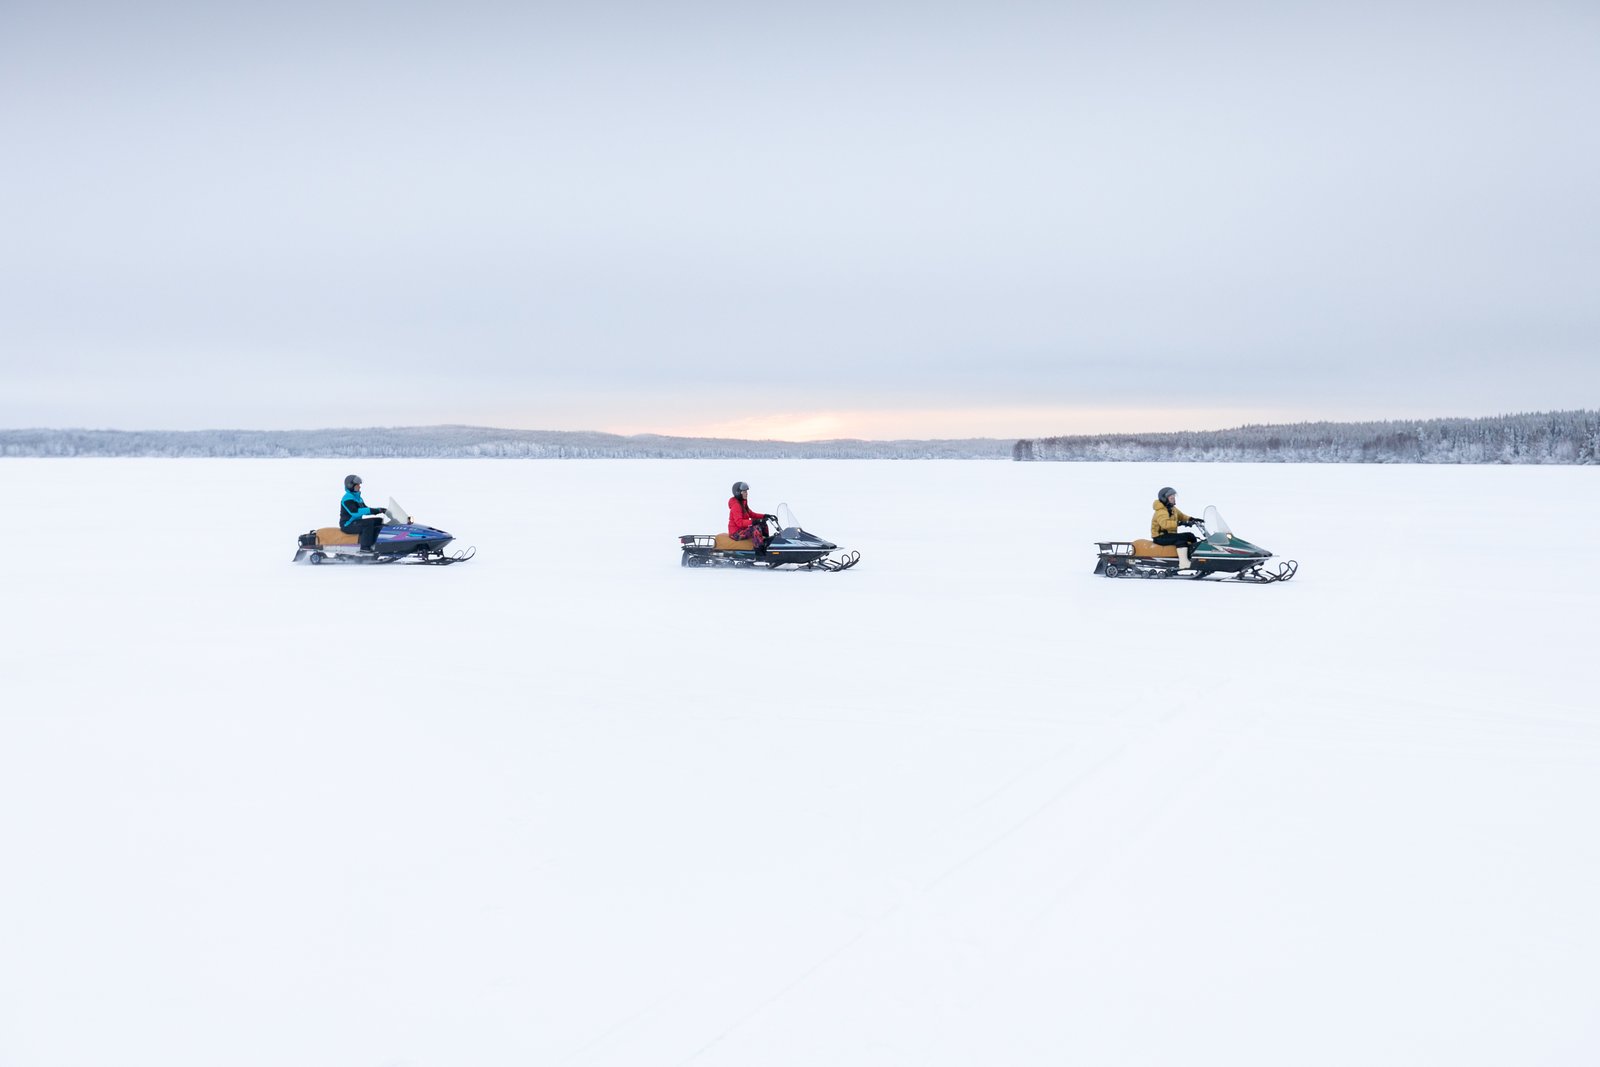 Three snowmobiles in single file on a frozen lake.